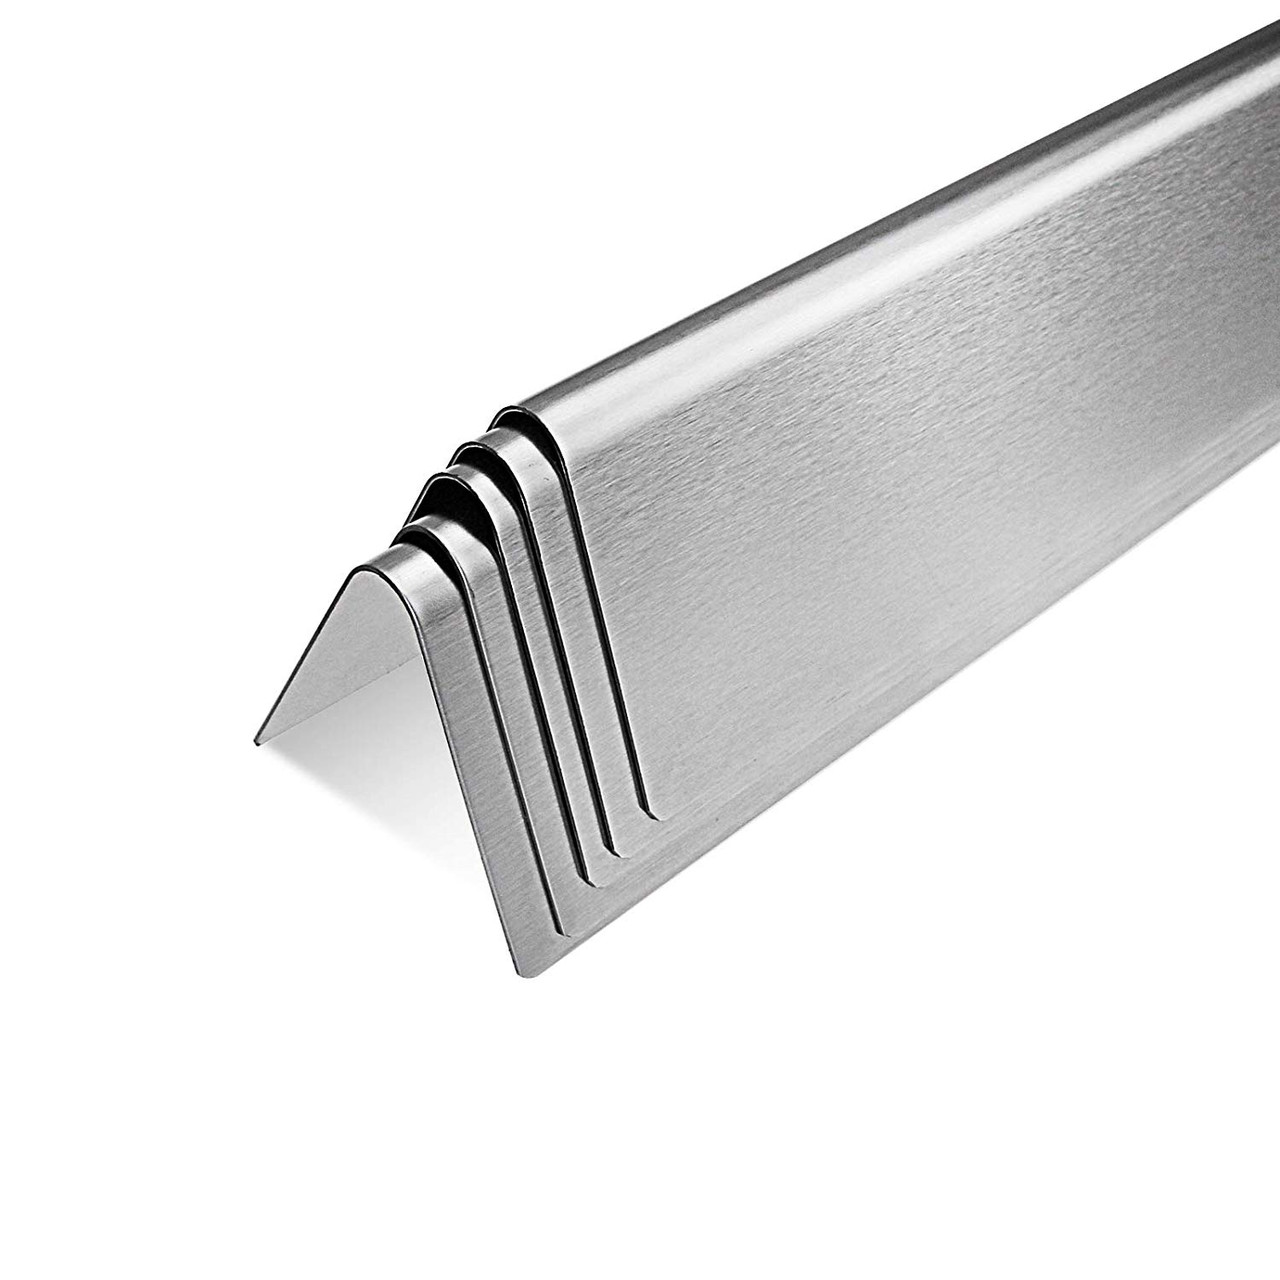 GasSaf 15.3 inch Flavorizer Bars 304 Stainless Steel Replacement for Weber Spirit 200 and E210 Series Gas Grills L15.3 x W3.5x T2.5 inch 3 packs